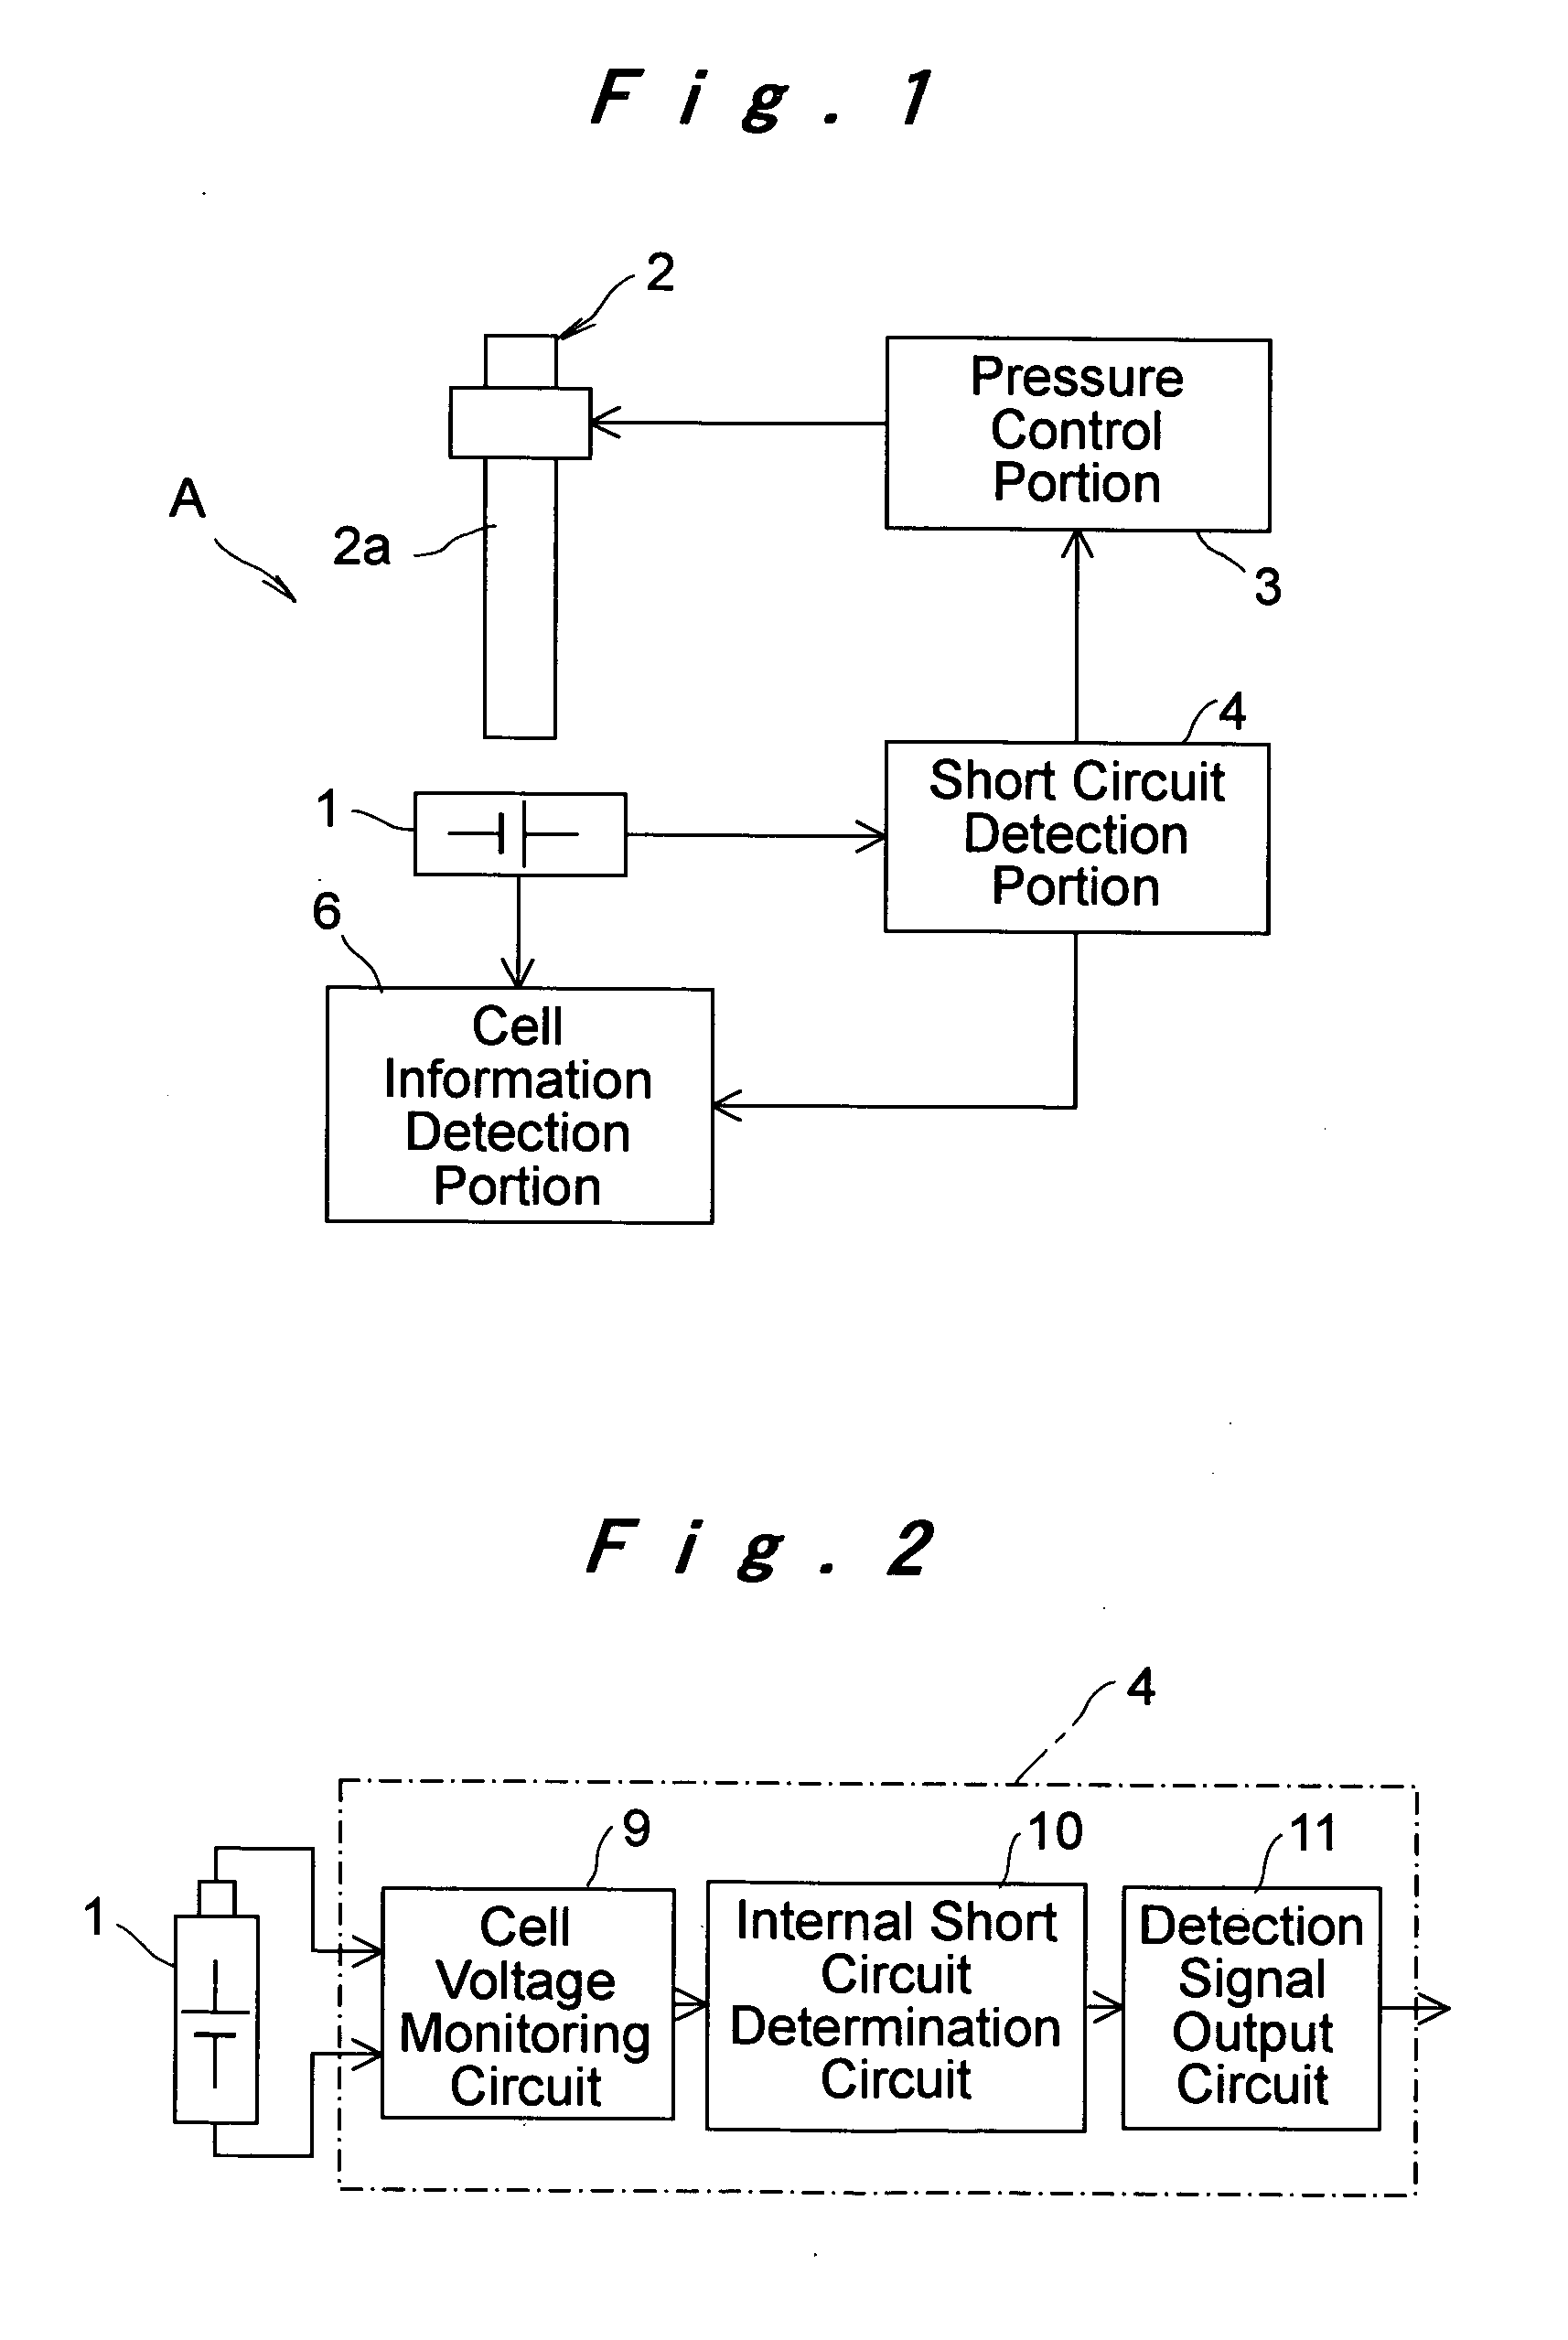 Cell evaluation device